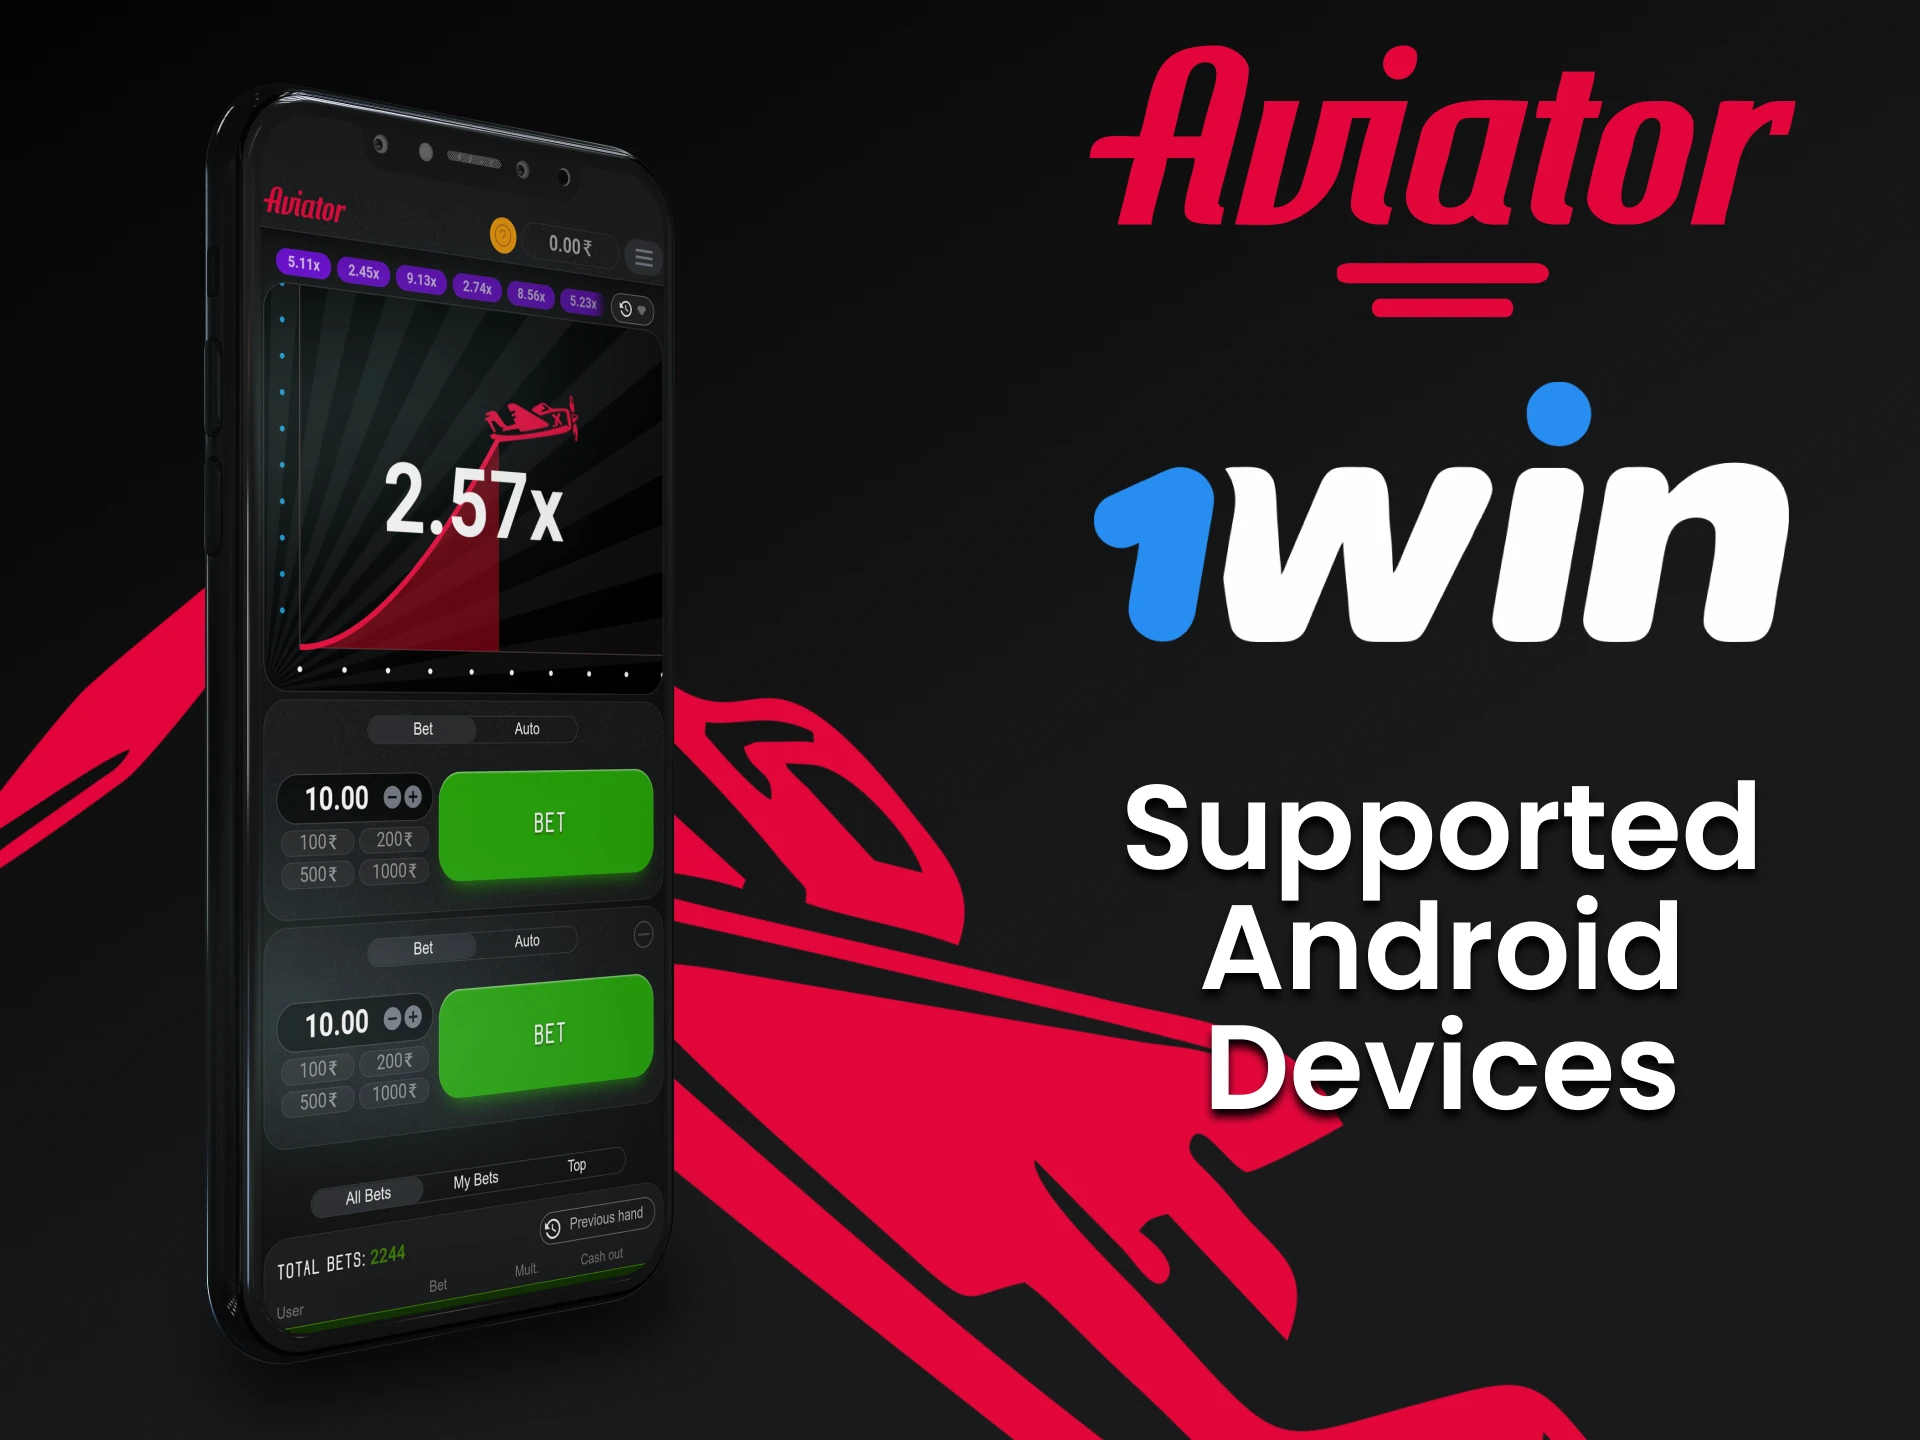 Play Aviator through the 1win app on your android device.